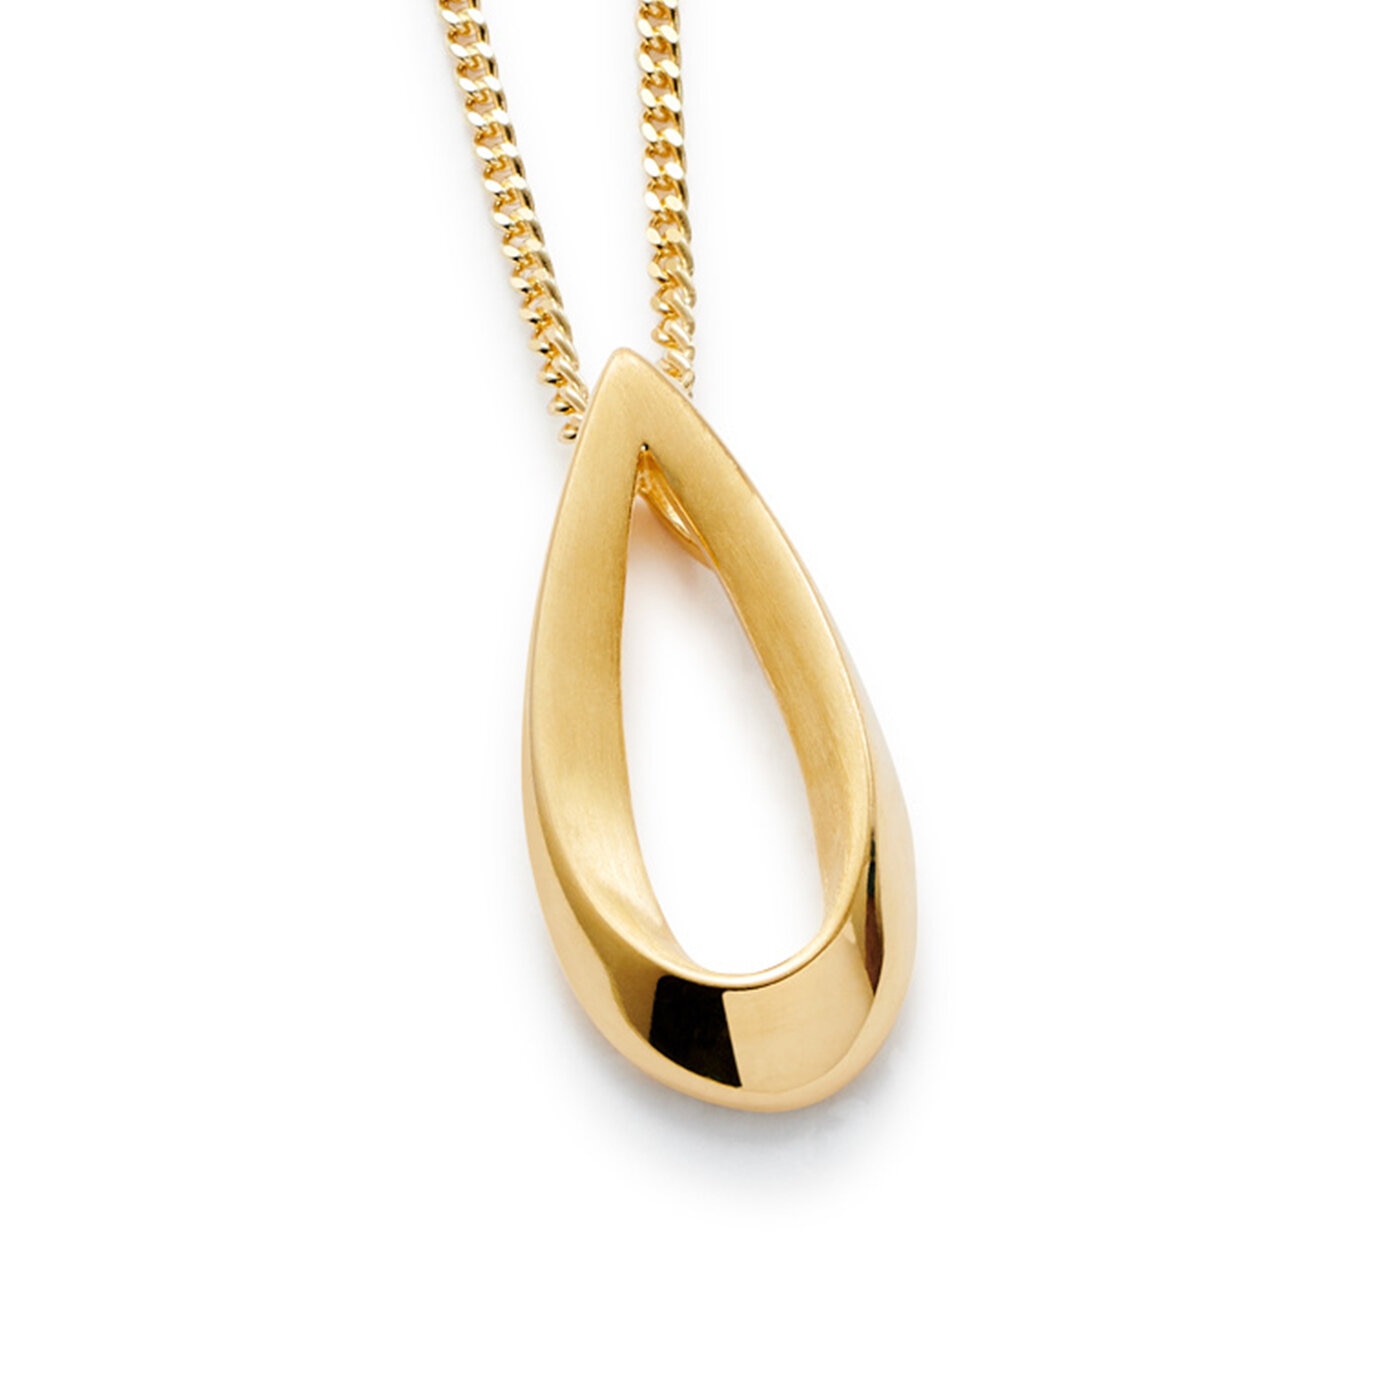 Raindrop gold plated silver necklace